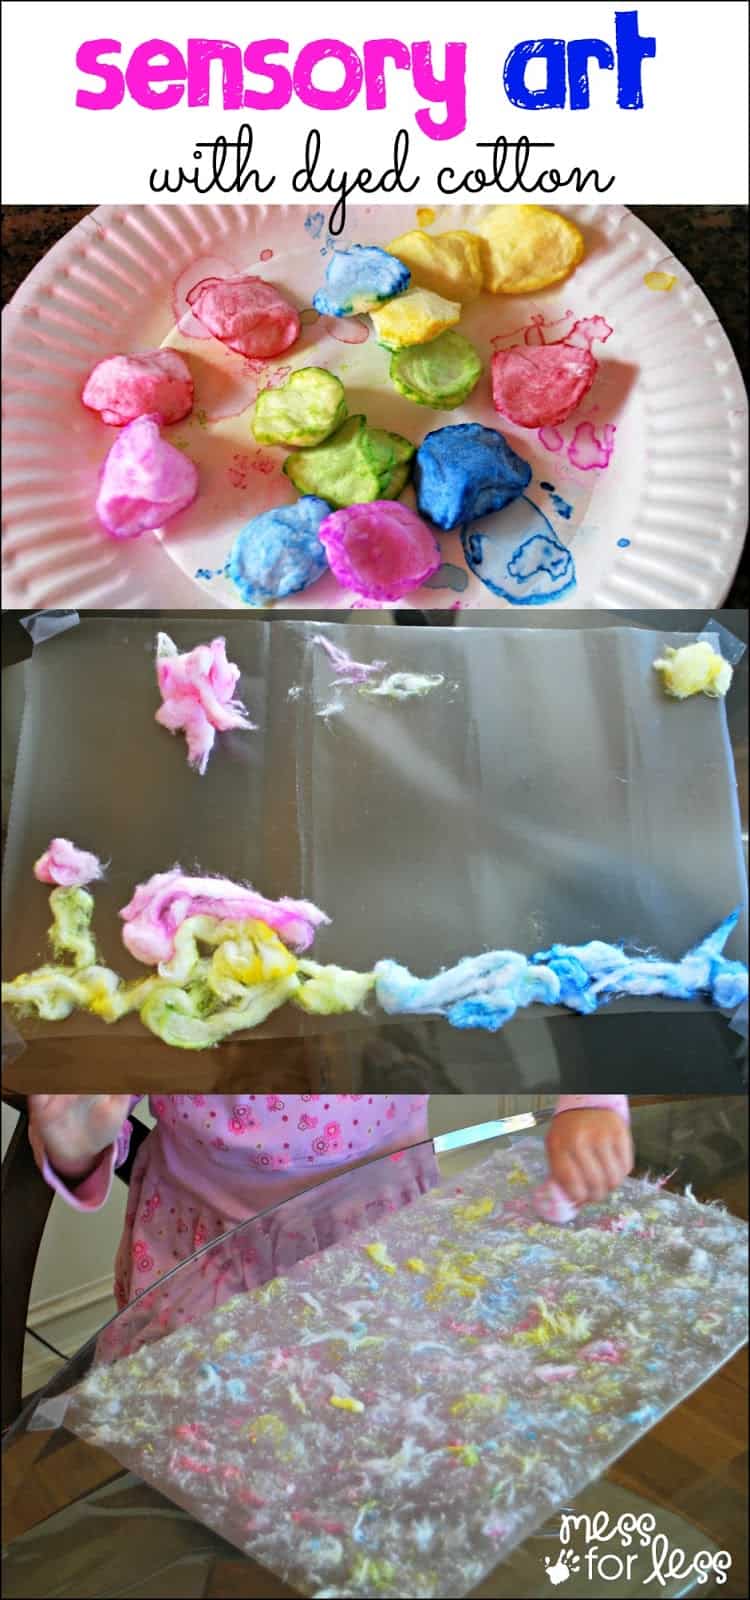 Sensory Art with Dyed Cotton - Such a fun way to create touchable art!